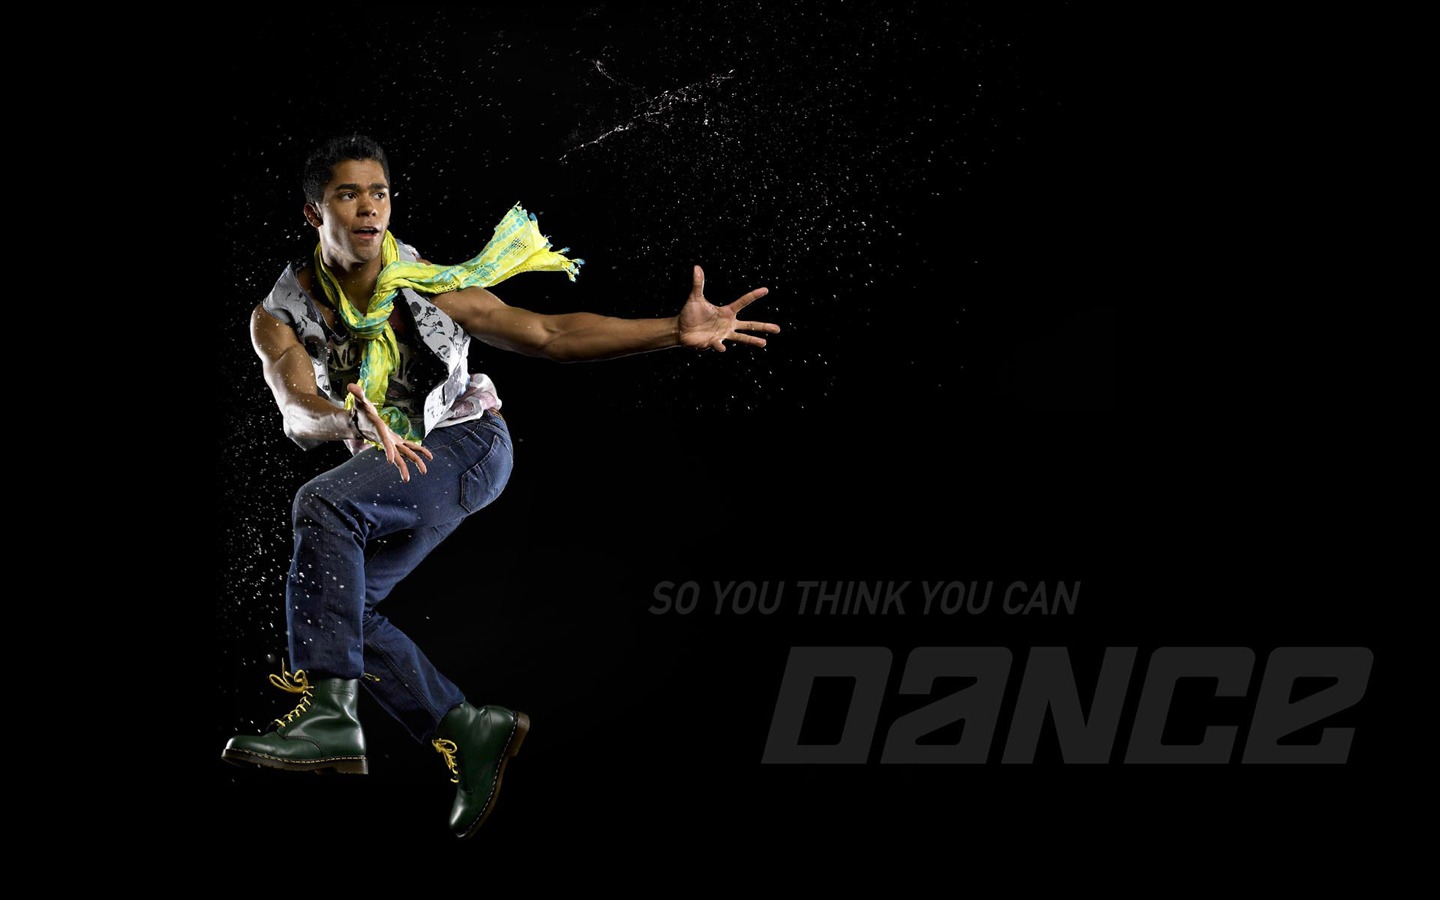 So You Think You Can Dance wallpaper (1) #2 - 1440x900